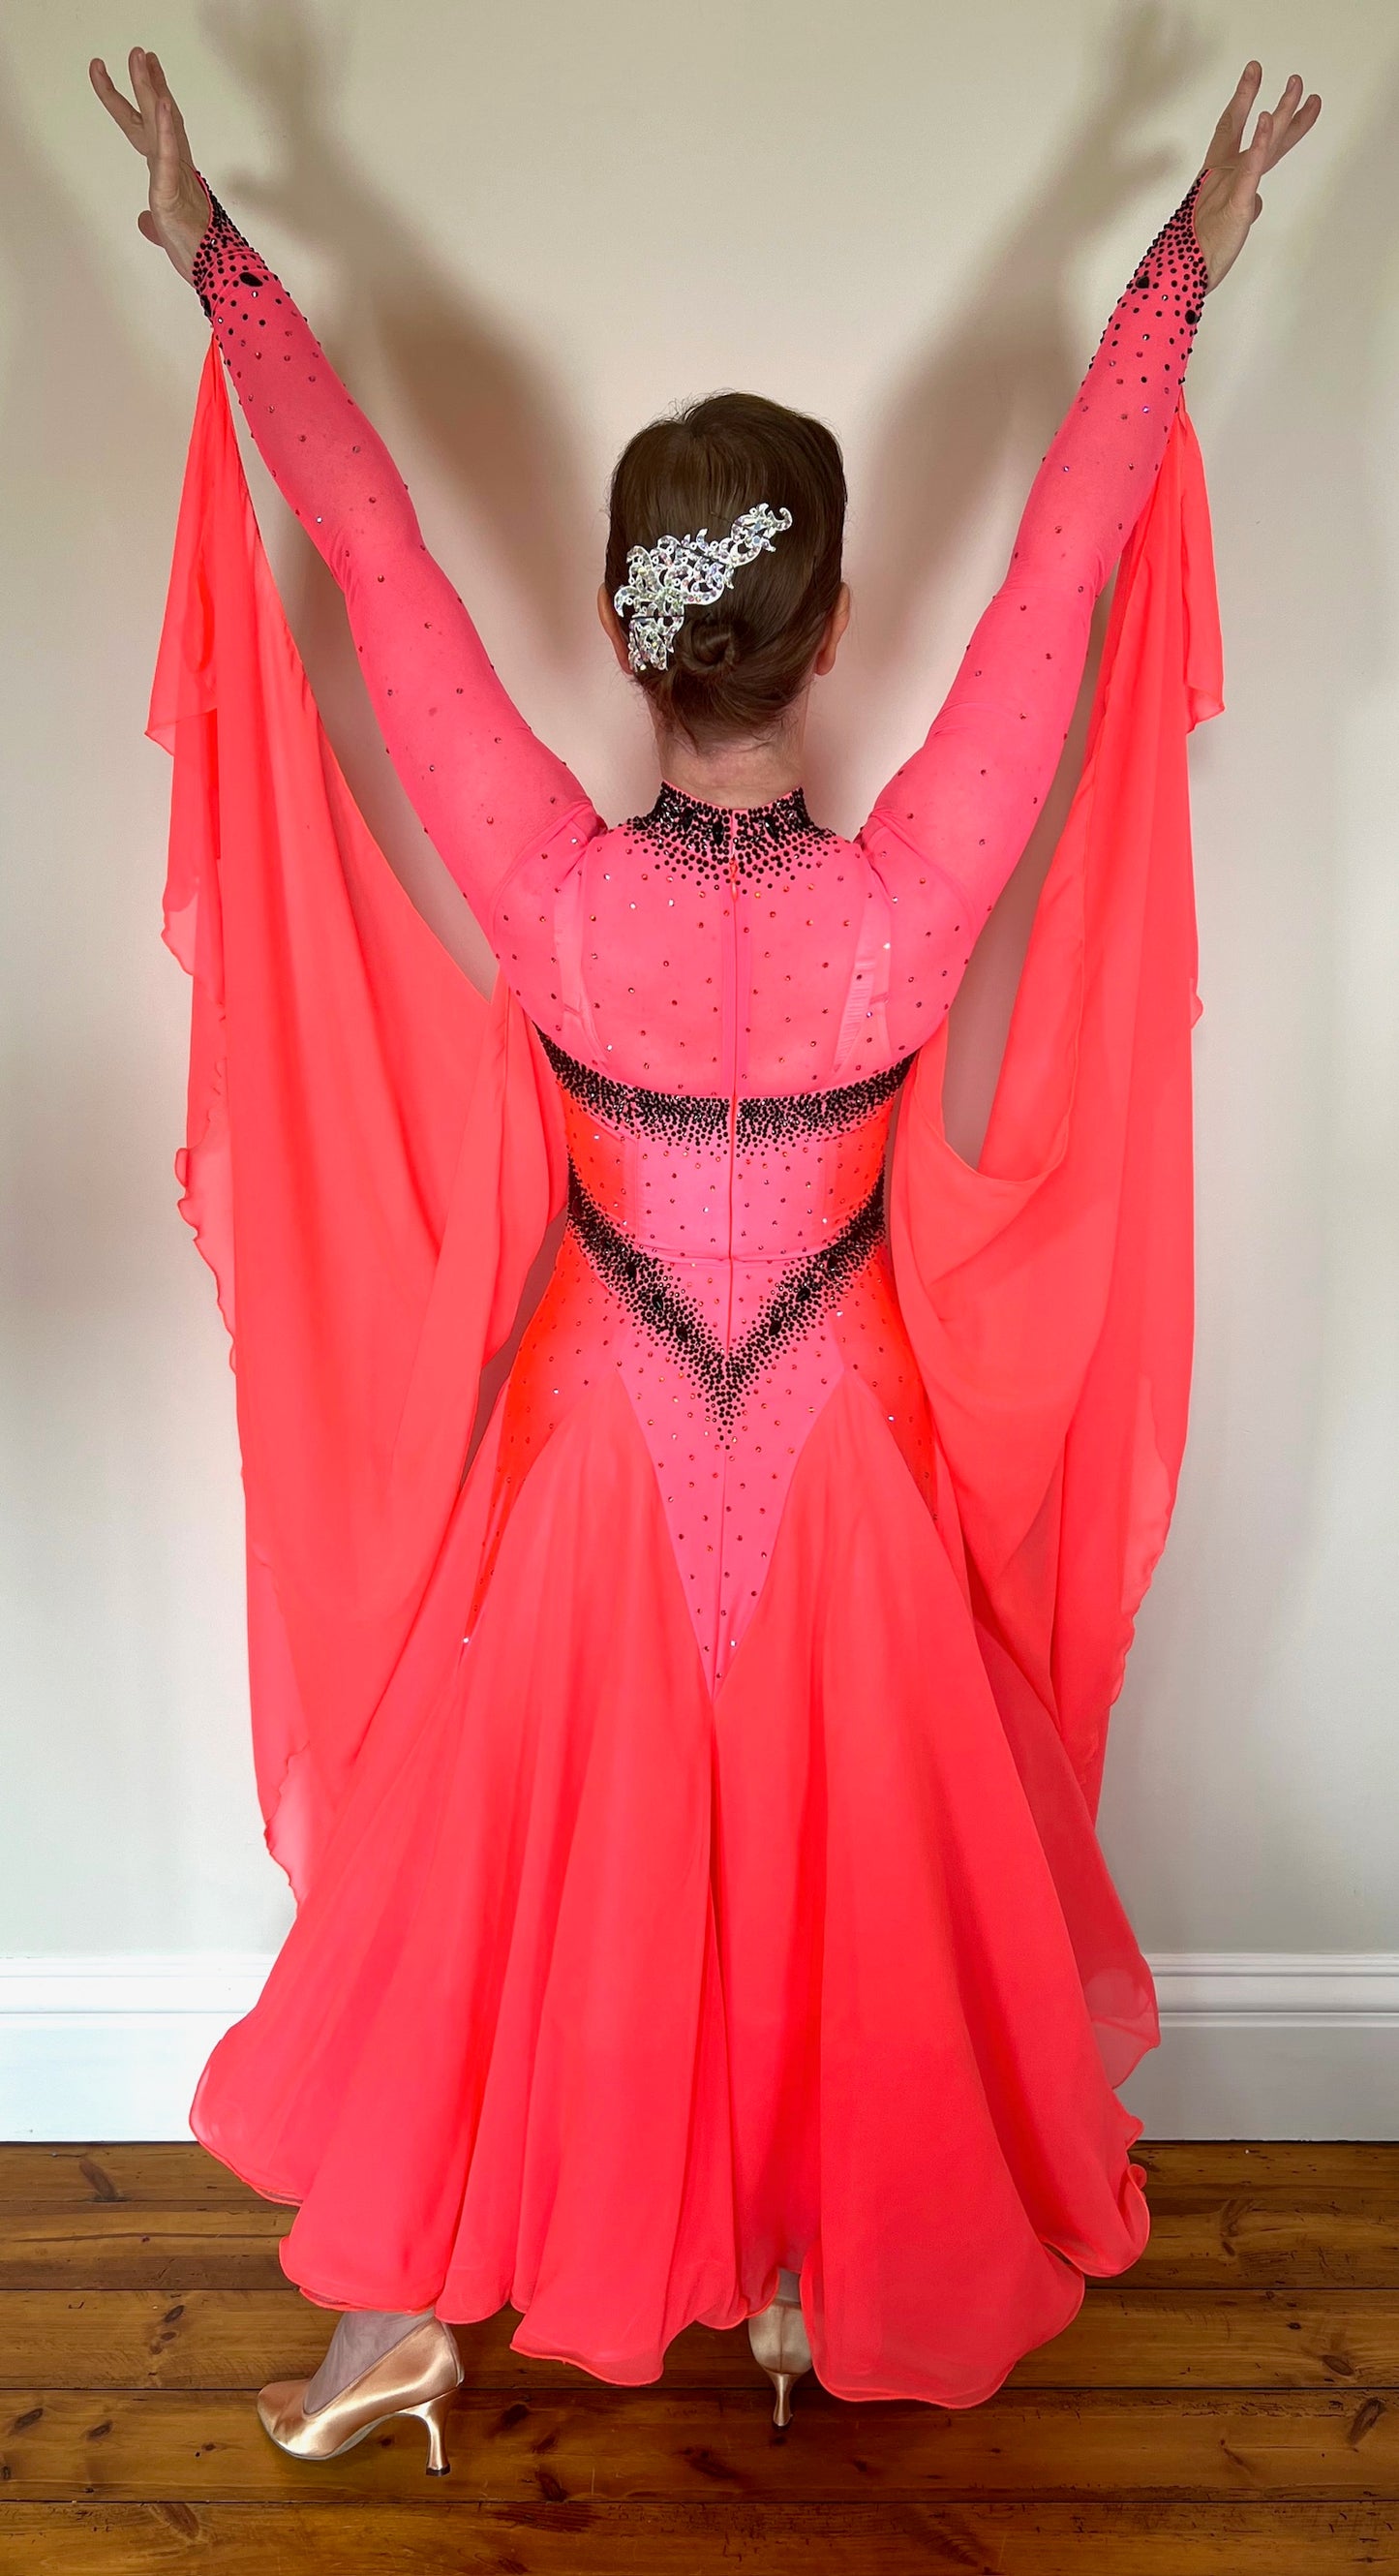 004 Striking Coral Ballroom Dress. Heavily decorated detailing in Jet stones. High back with detachable floats. A stand out eye catching dress.